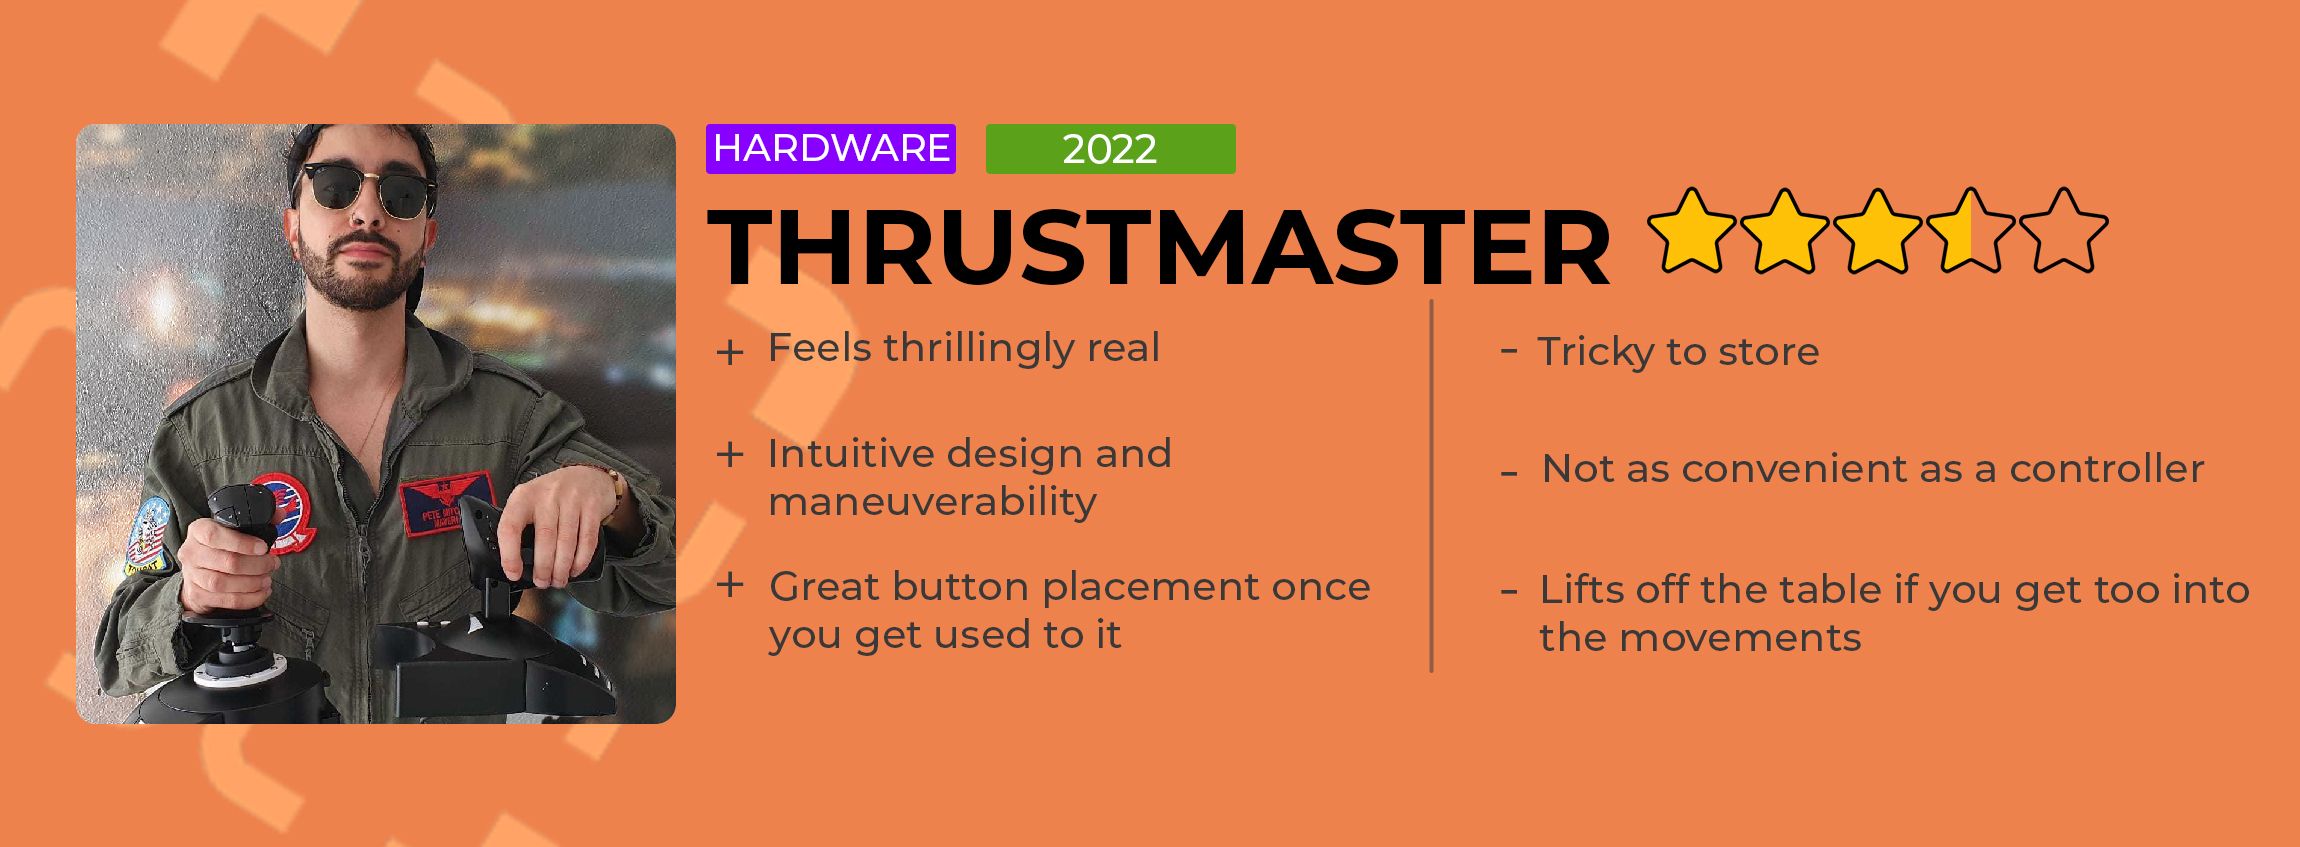 Thrustmaster Review Card